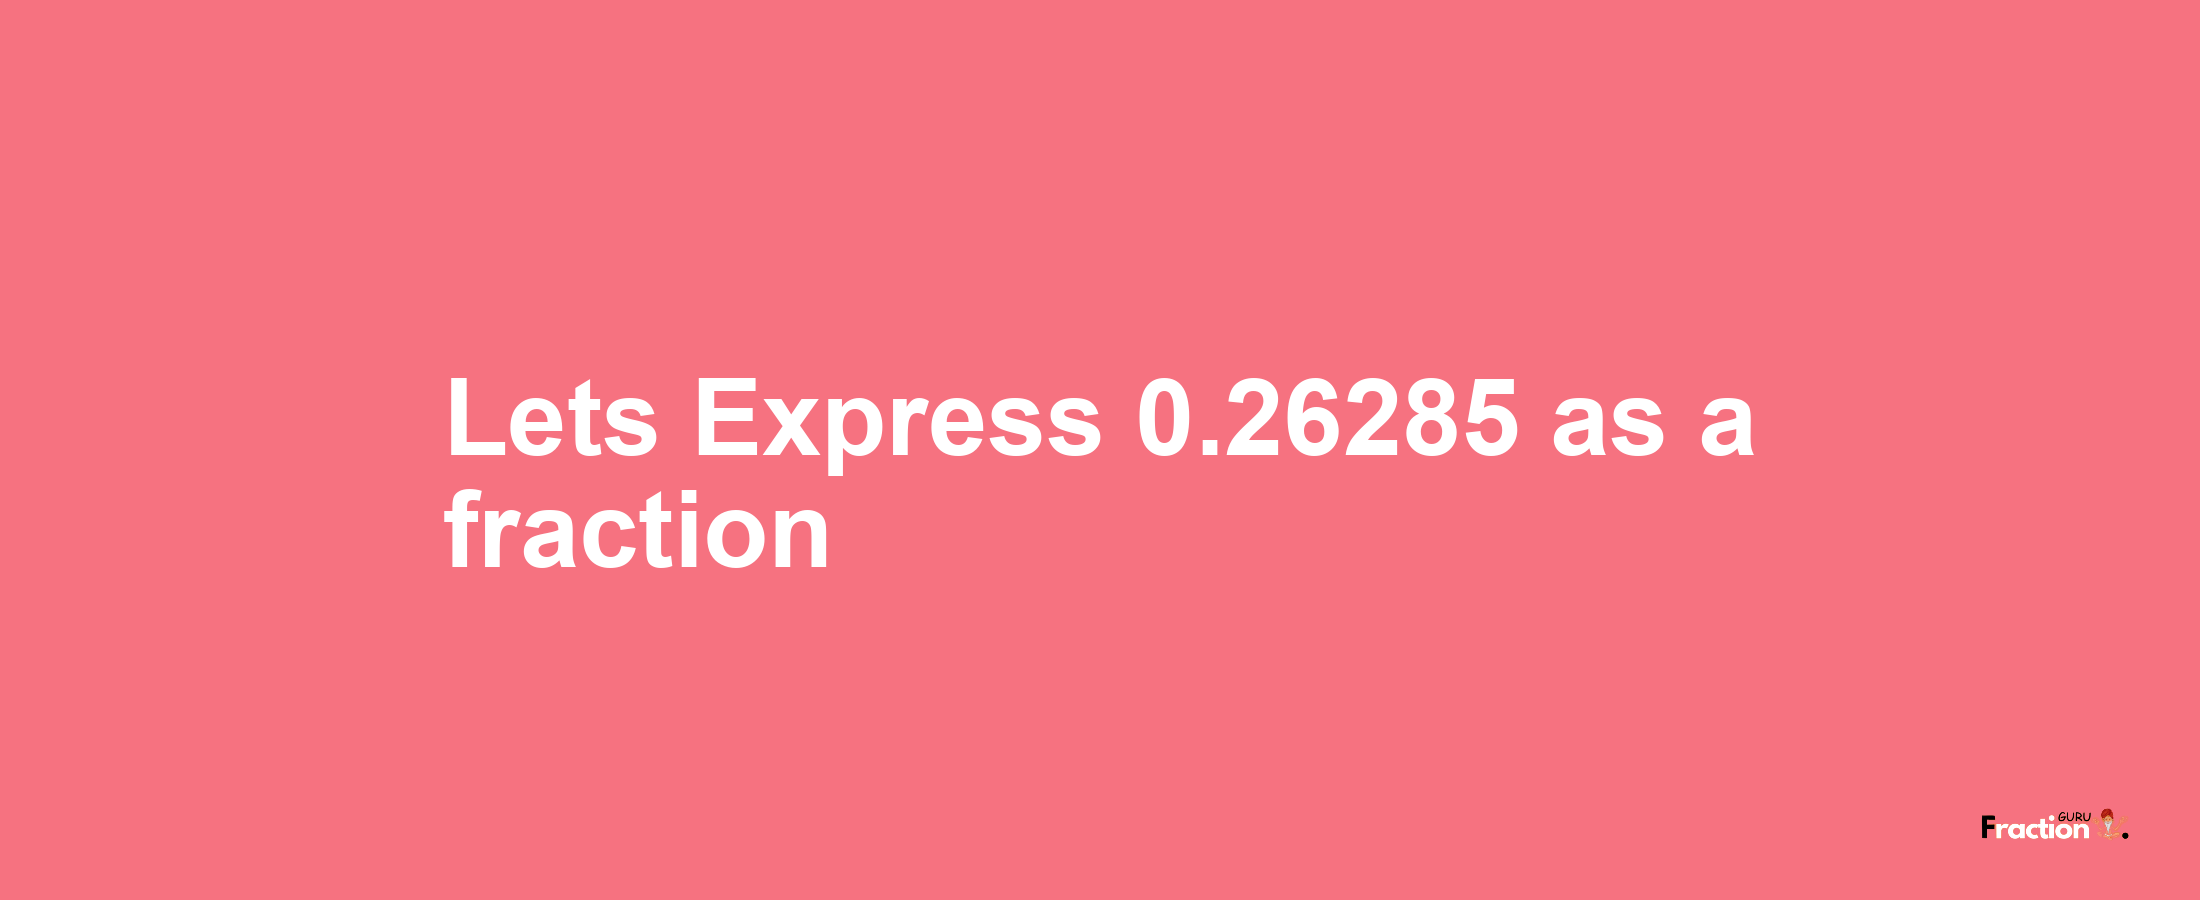 Lets Express 0.26285 as afraction